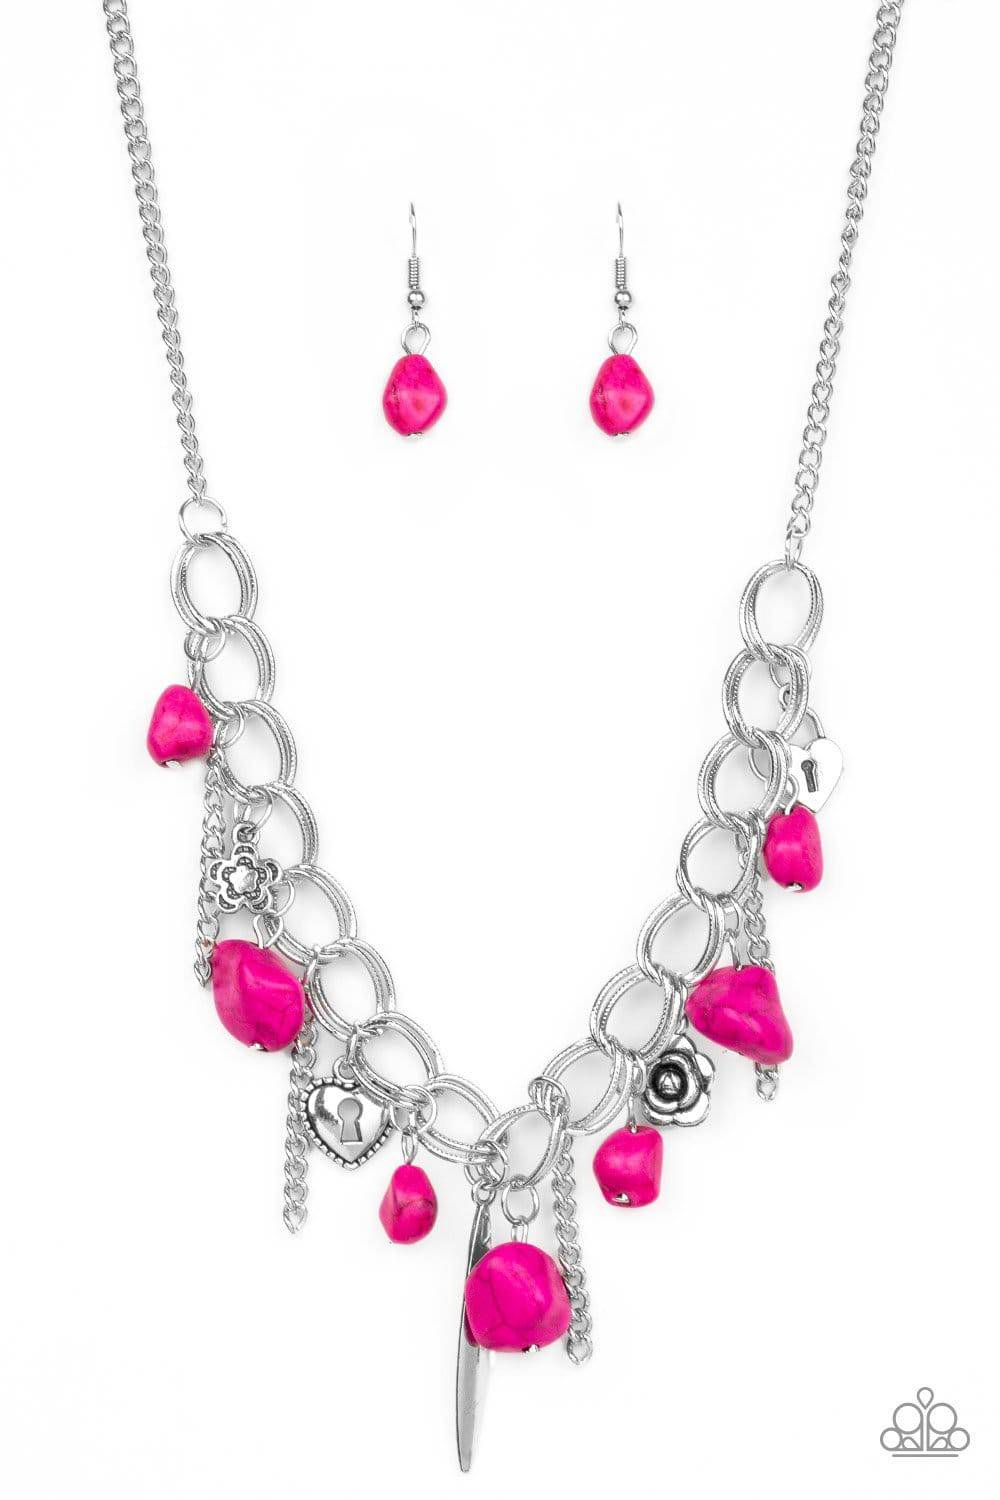 Southern Sweetheart - Pink Floral and Heart Charm Necklace - Paparazzi - GlaMarous Titi Jewels